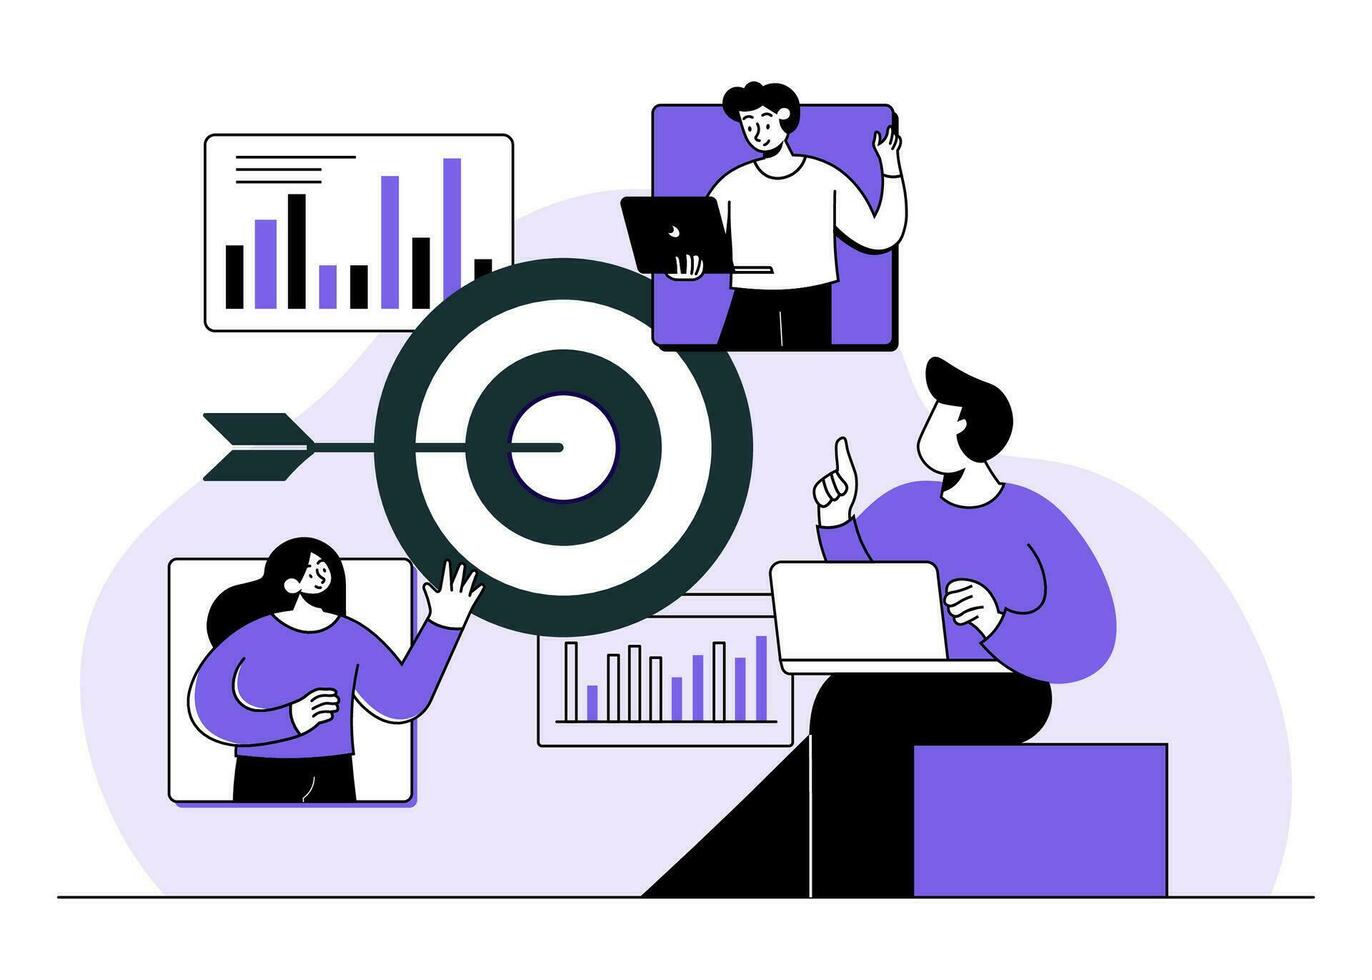 manager giving tasks and feedback about project to employees, Workflow management, effective and productive teamwork, Online business communication, Remote work process flat illustration, Meeting vector